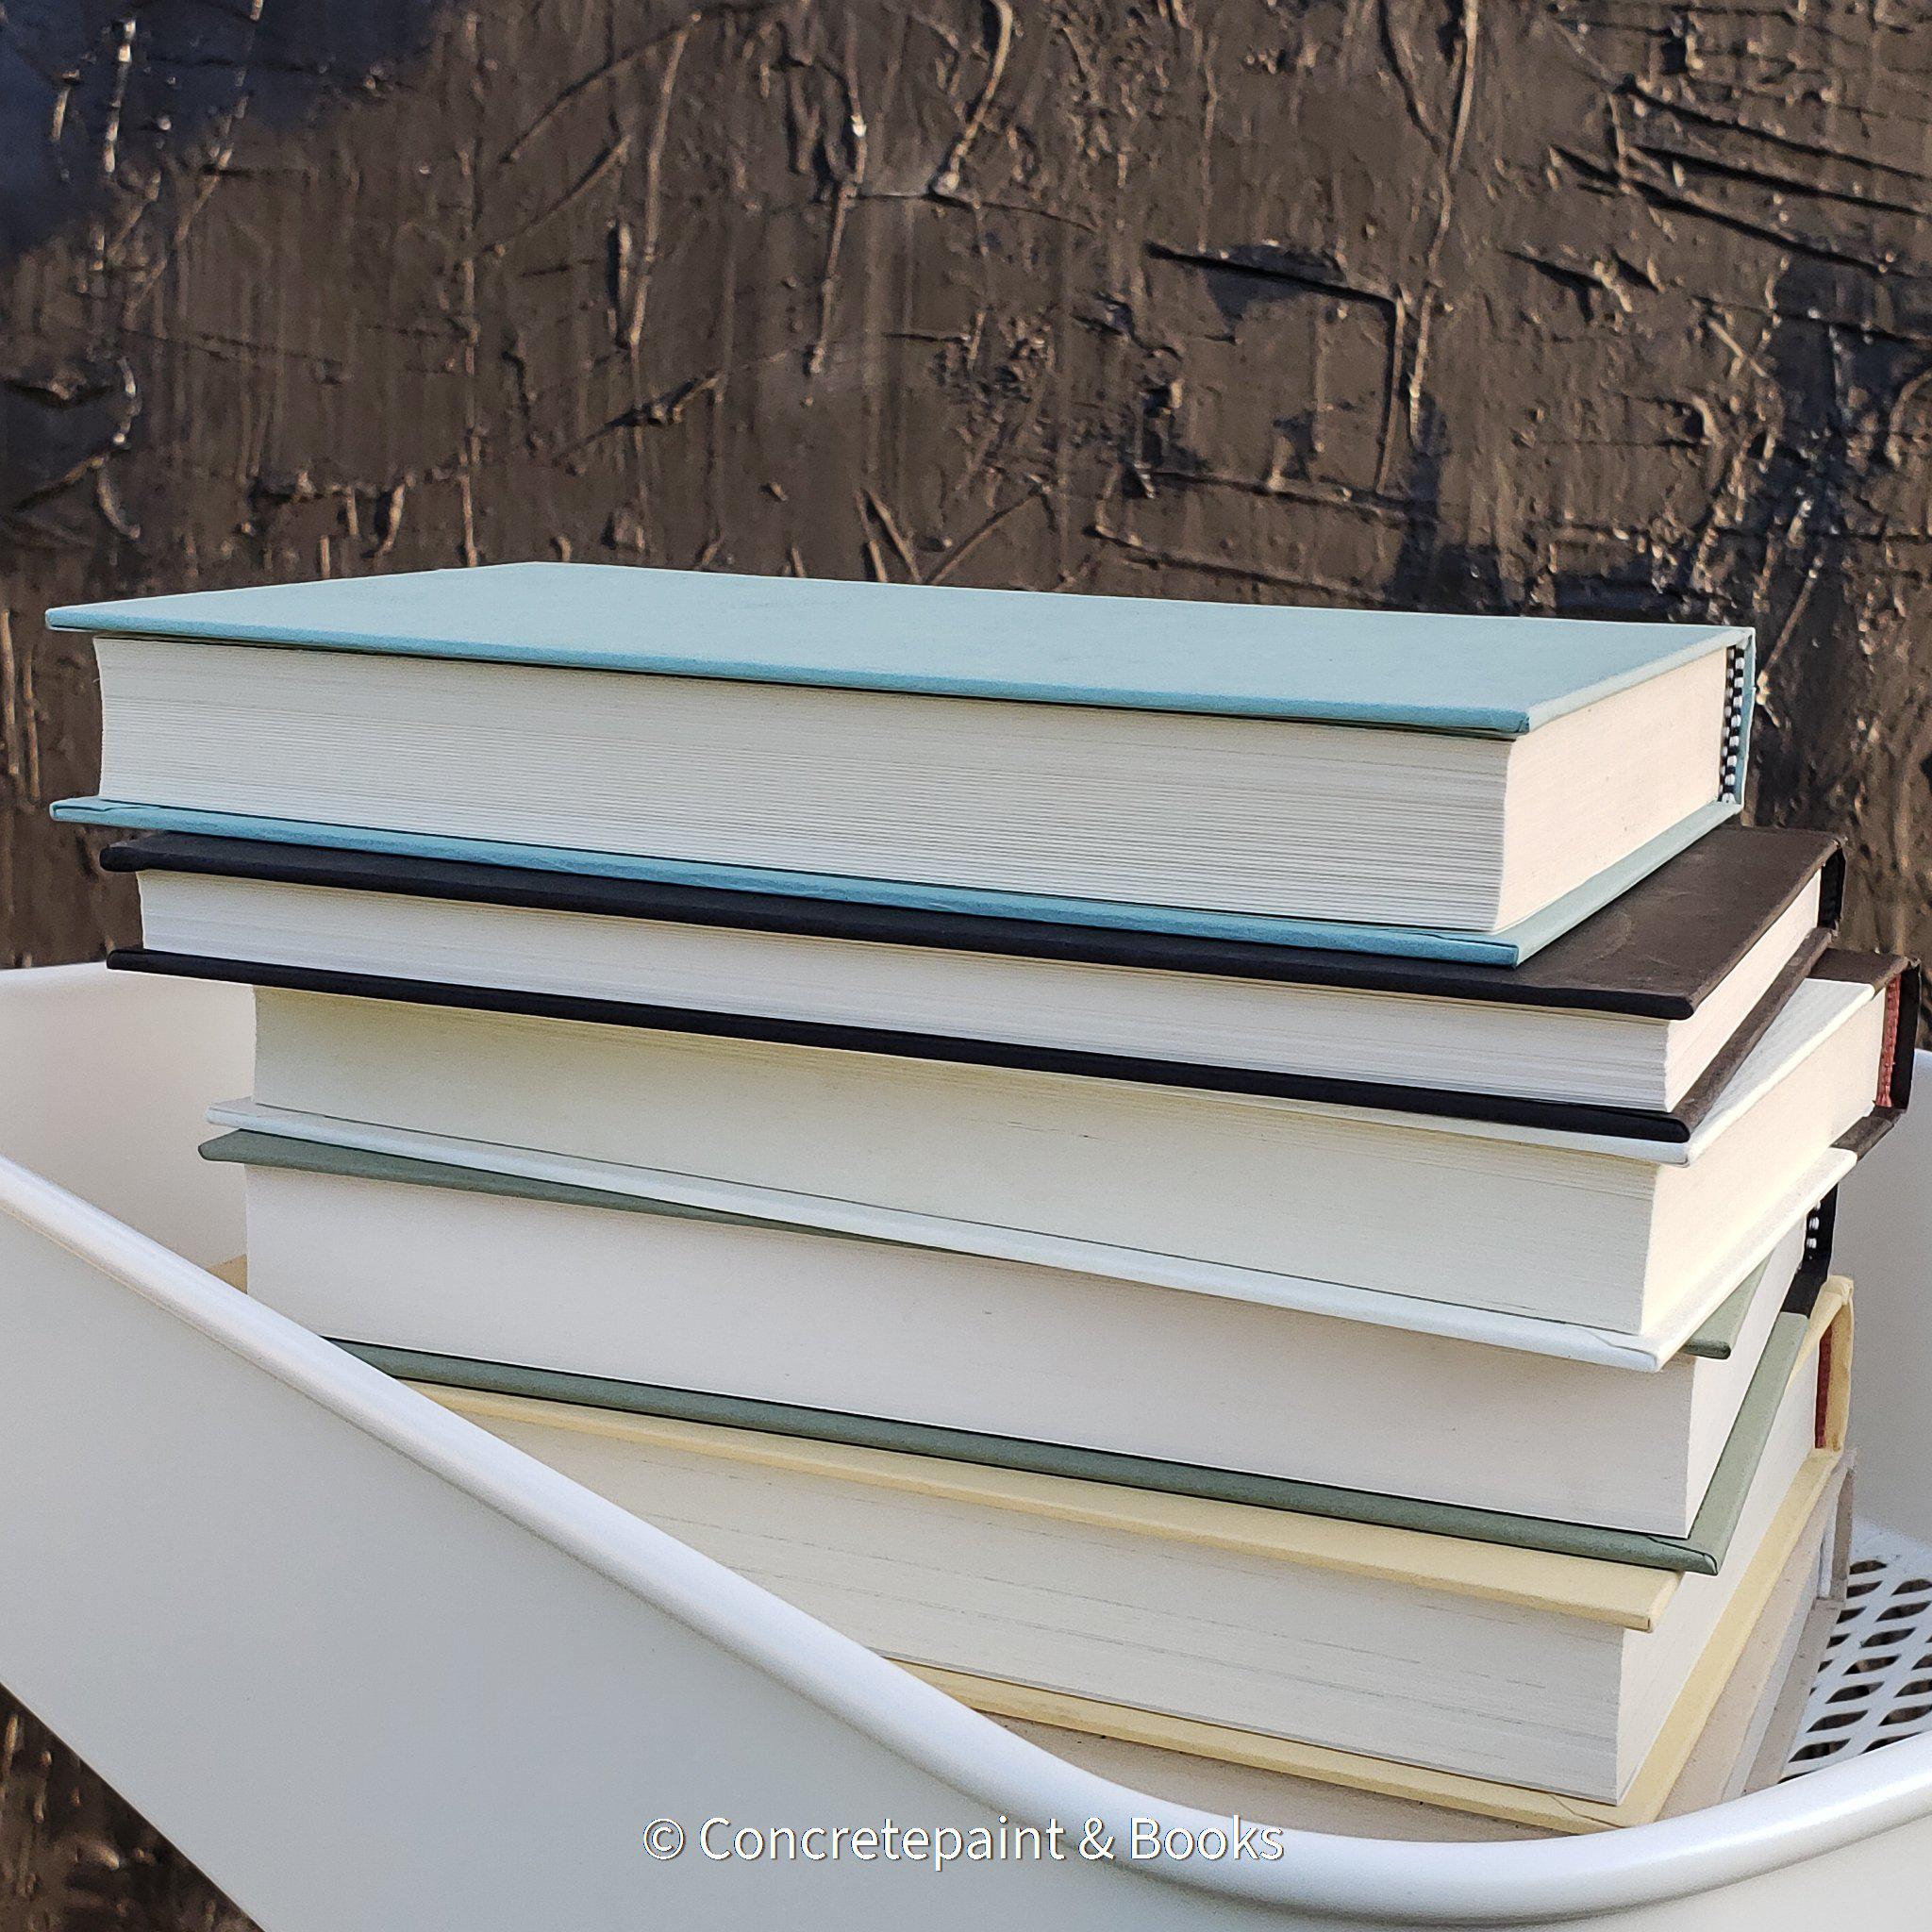 large stack of hardcover books staged and used for decorating display. Teal, neutral, black , and mint green décor. 